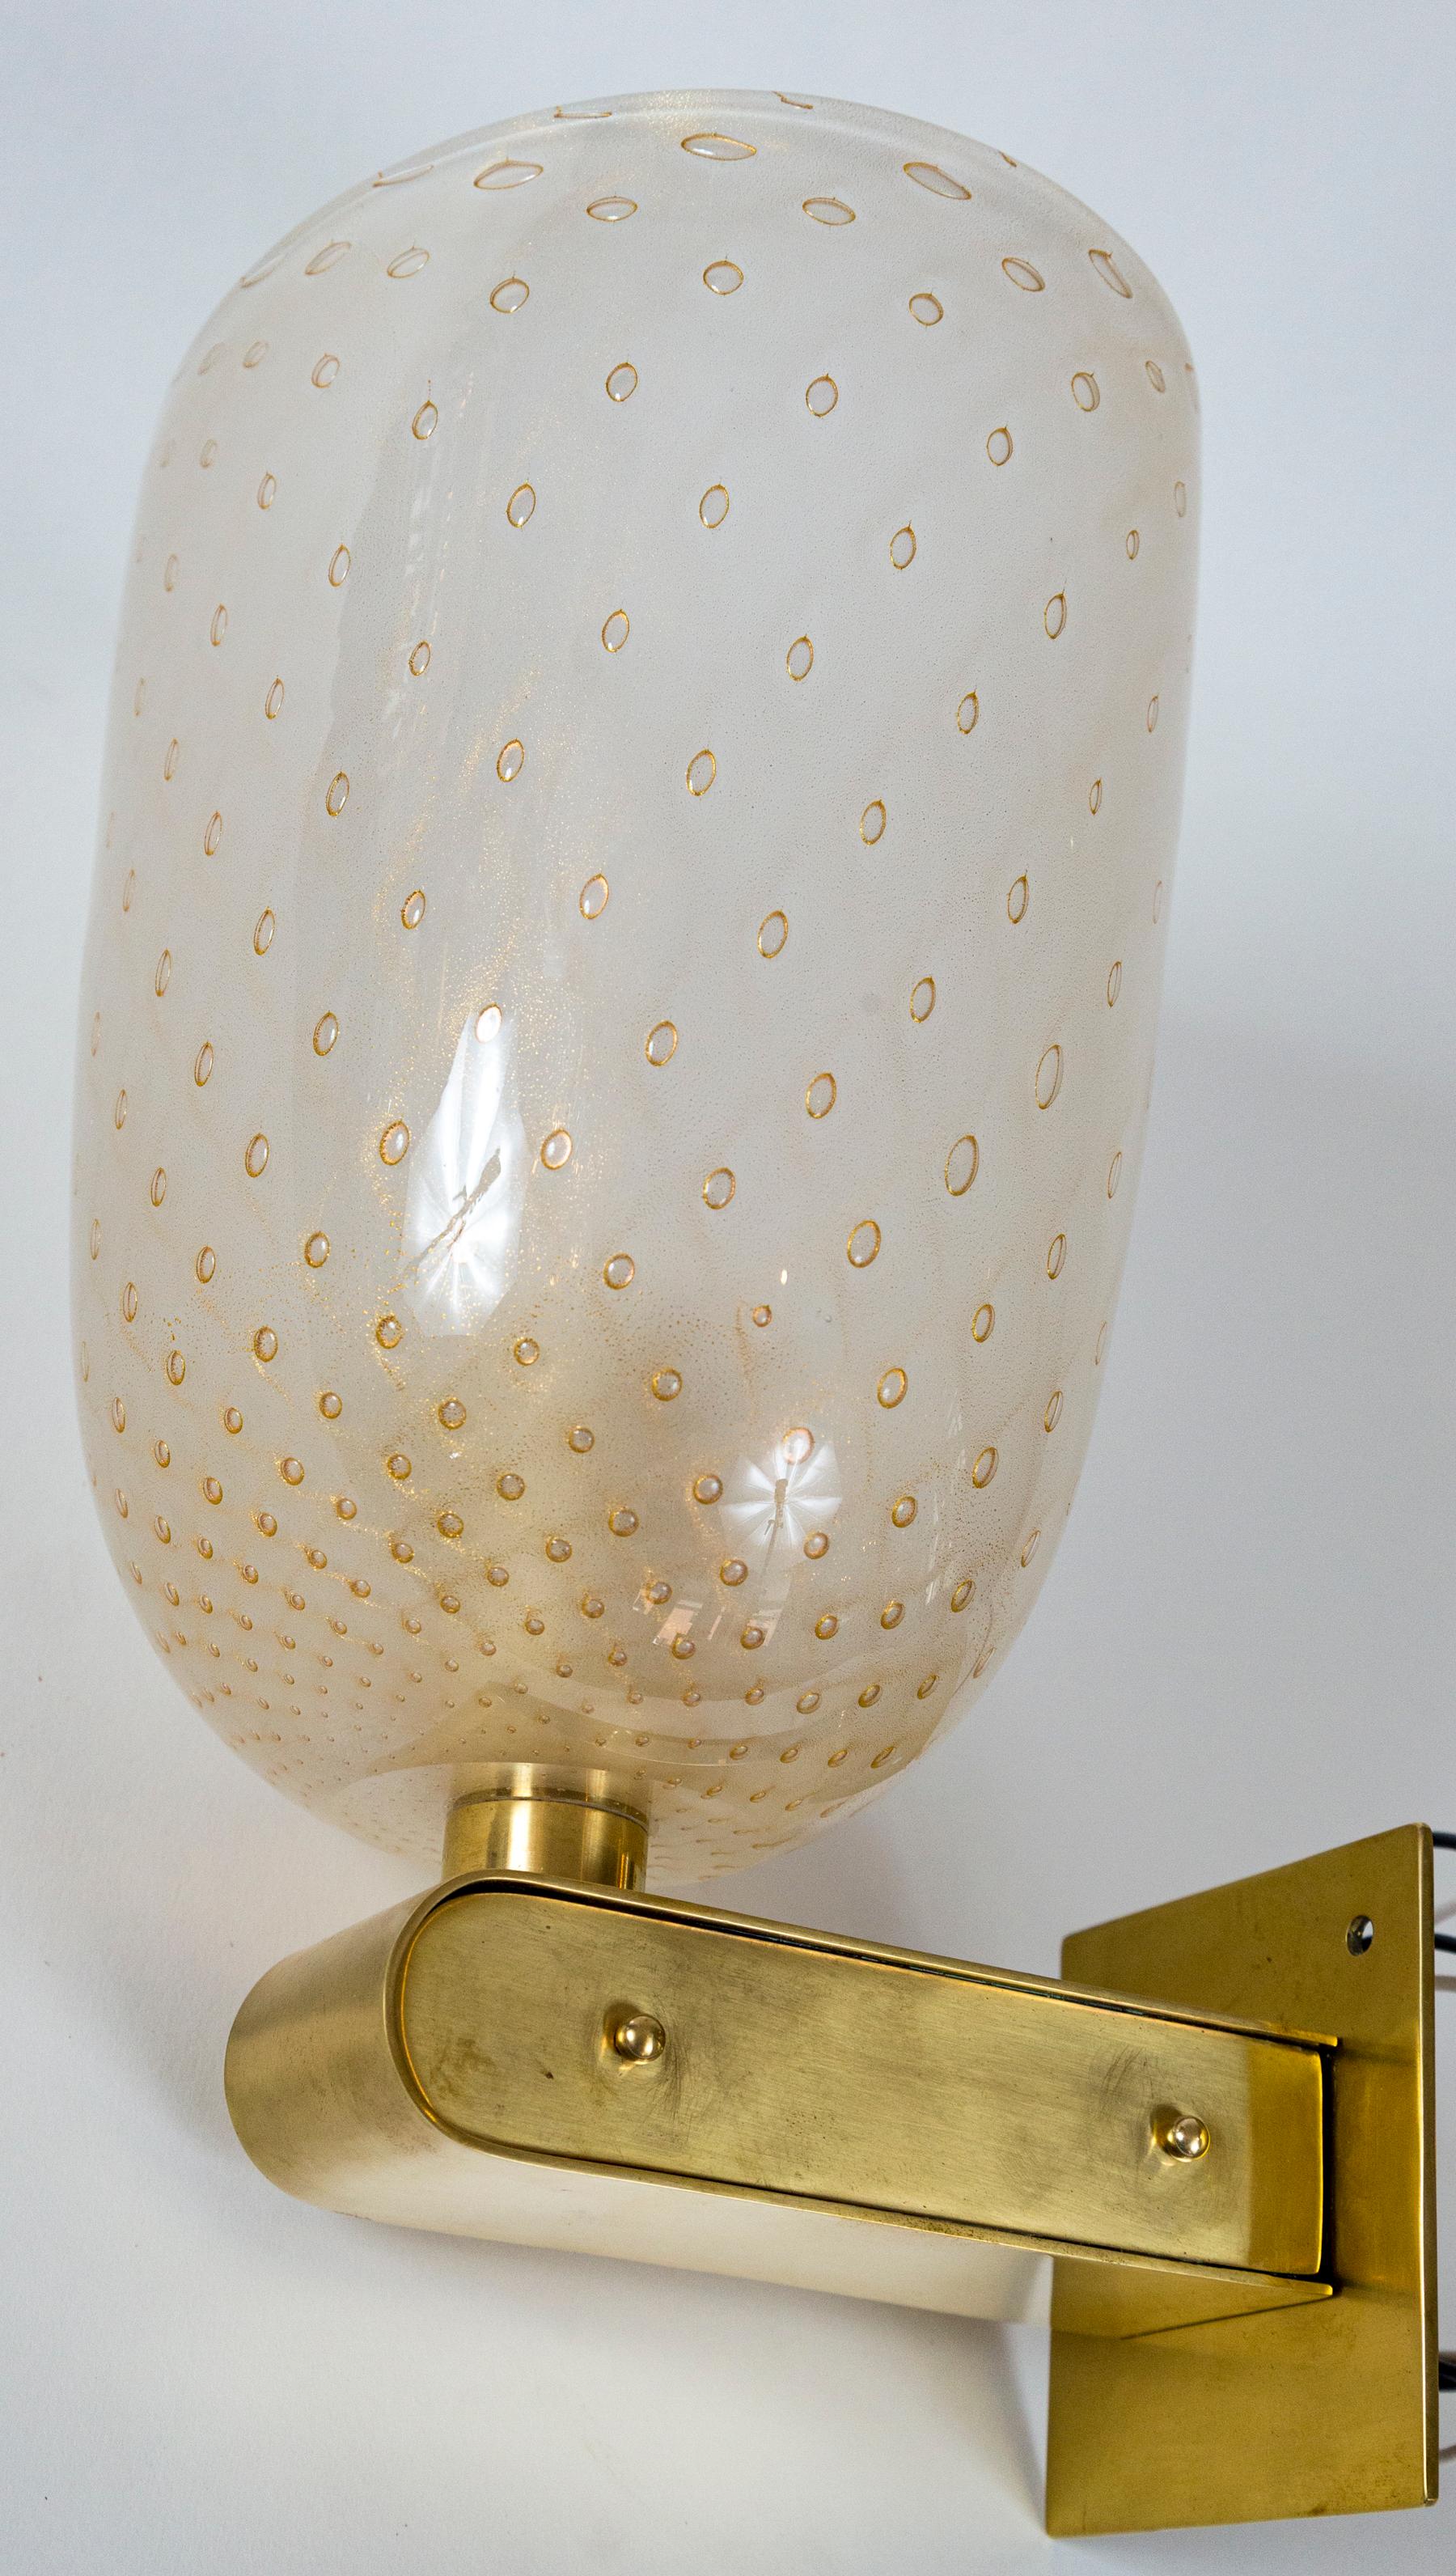 Pair of Murano “pulegoso” glass and brass sconces, modified art deco brass arm upholds a large handblown oval shape ivory blown glass cup with gold infused 23-karat gold bubbles.
Two pairs available, priced per pair
Origin: Venice, Italy
Dating: